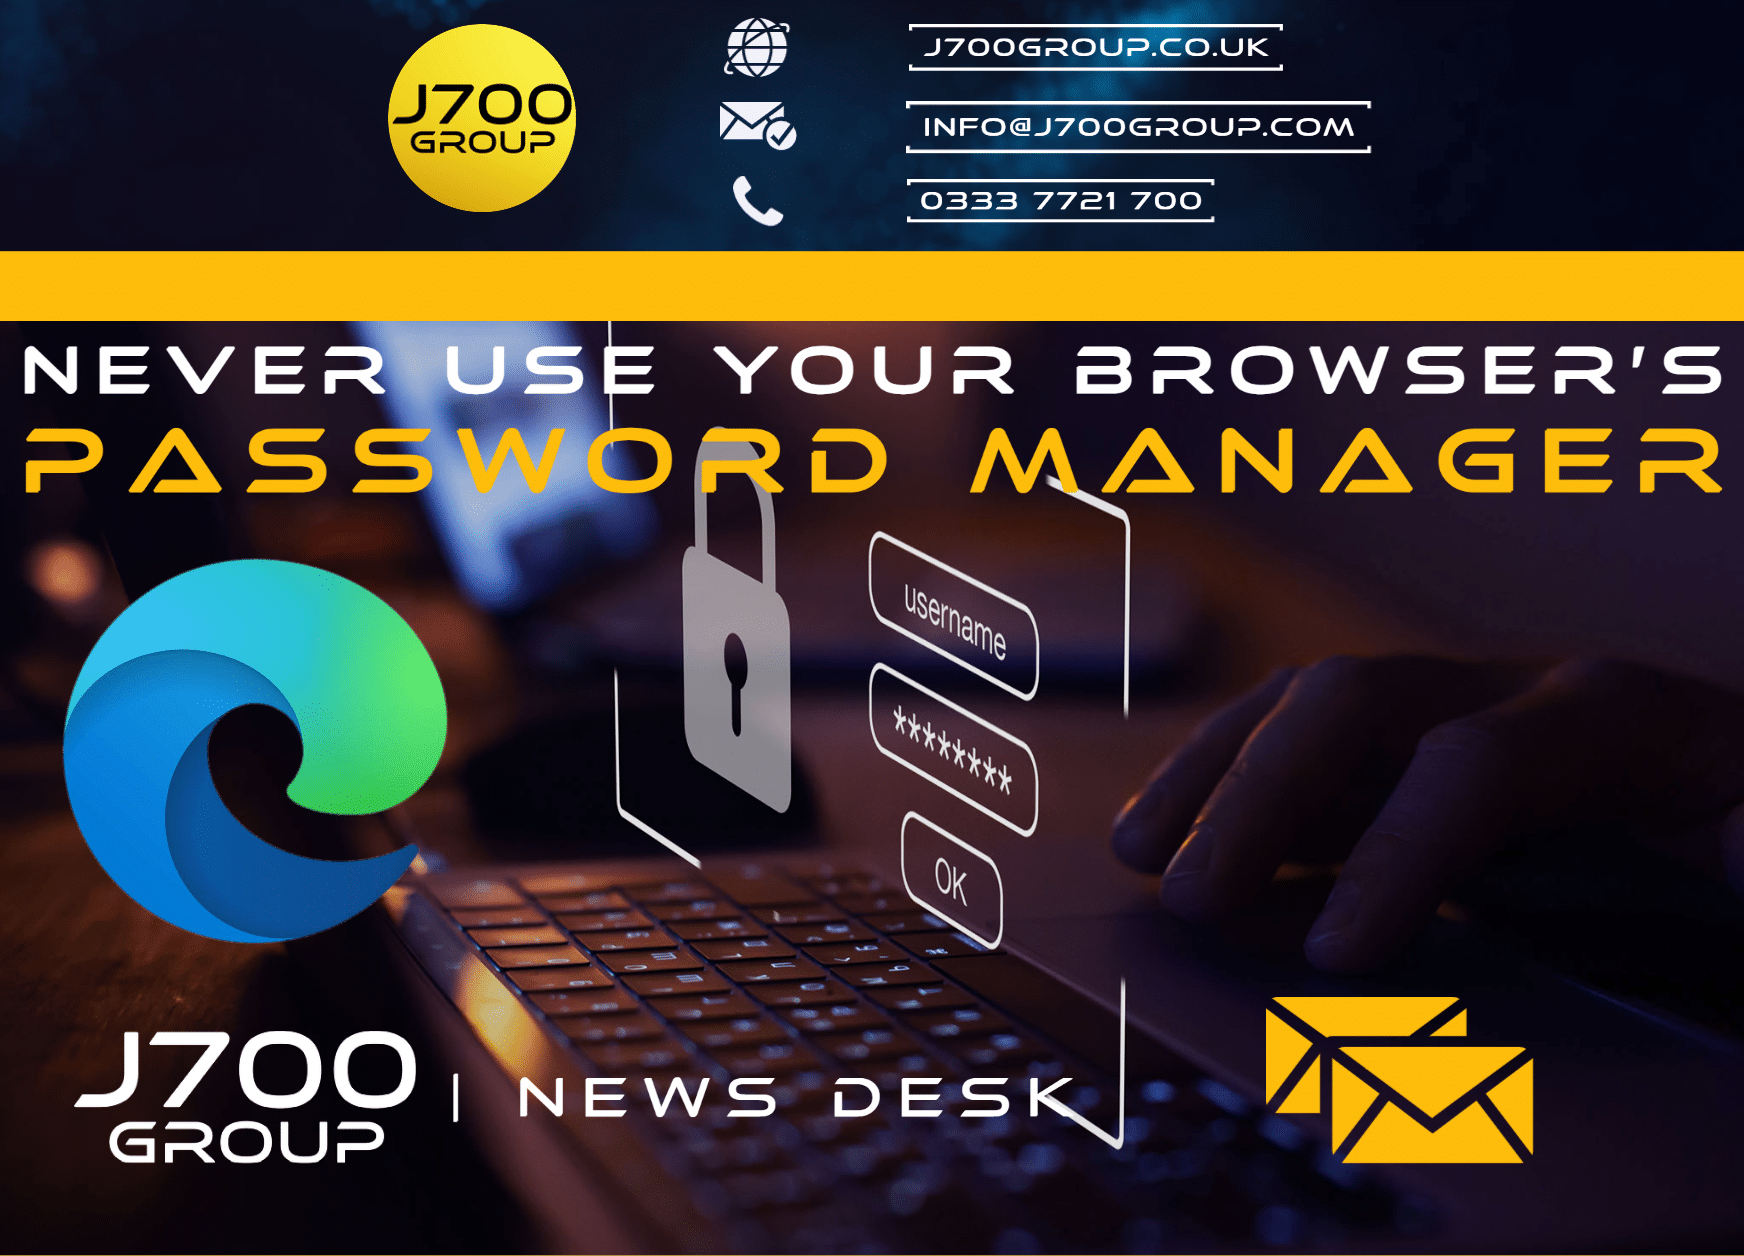 Never use your browser’s password manager